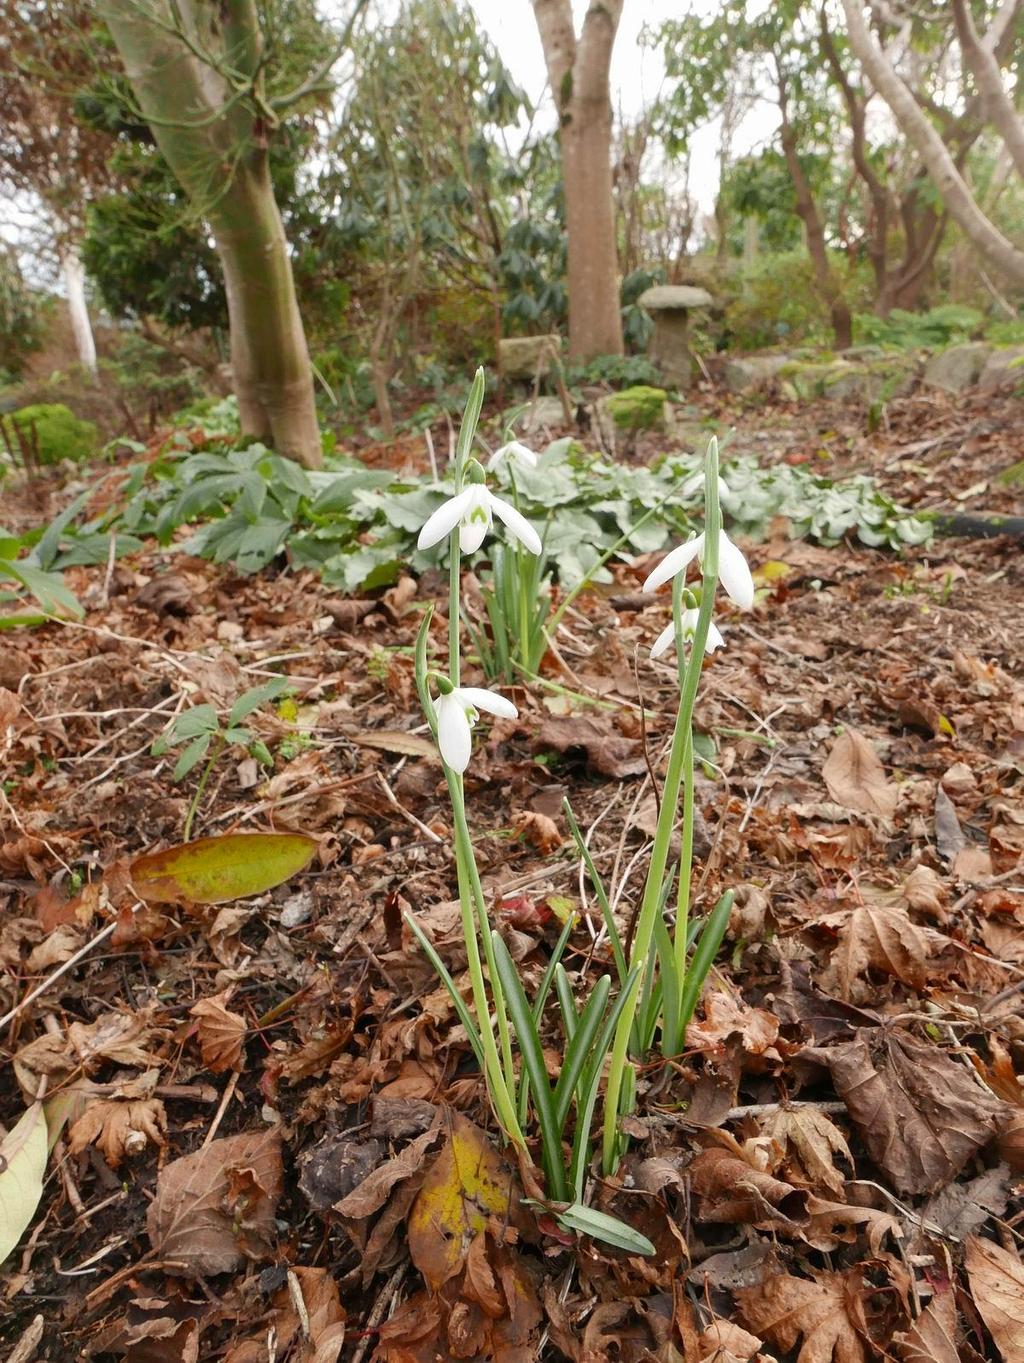 One day our temperature reached 12C warm enough for this small clump of Galanthus